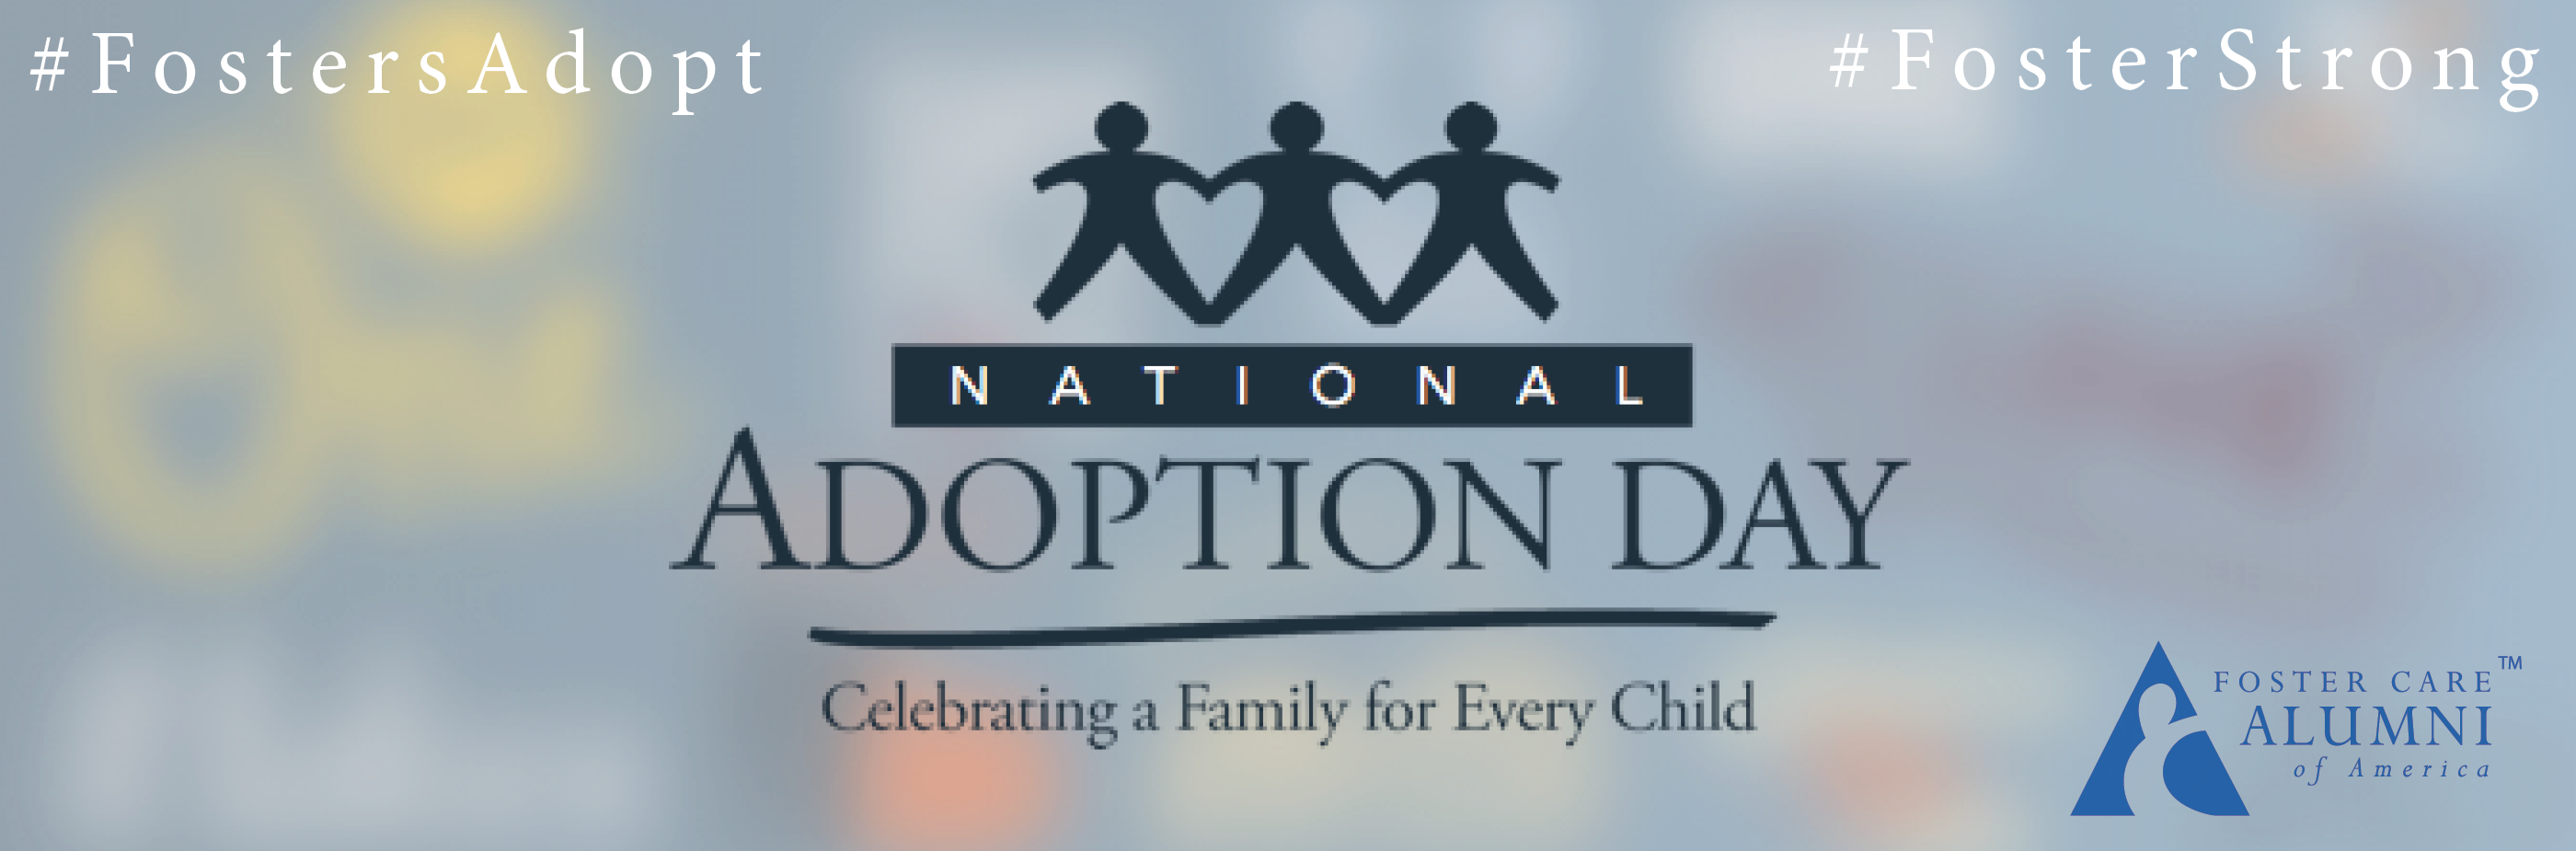 Image representing Foster Care Alumni of America for National Adoption Month - #FostersAdopt